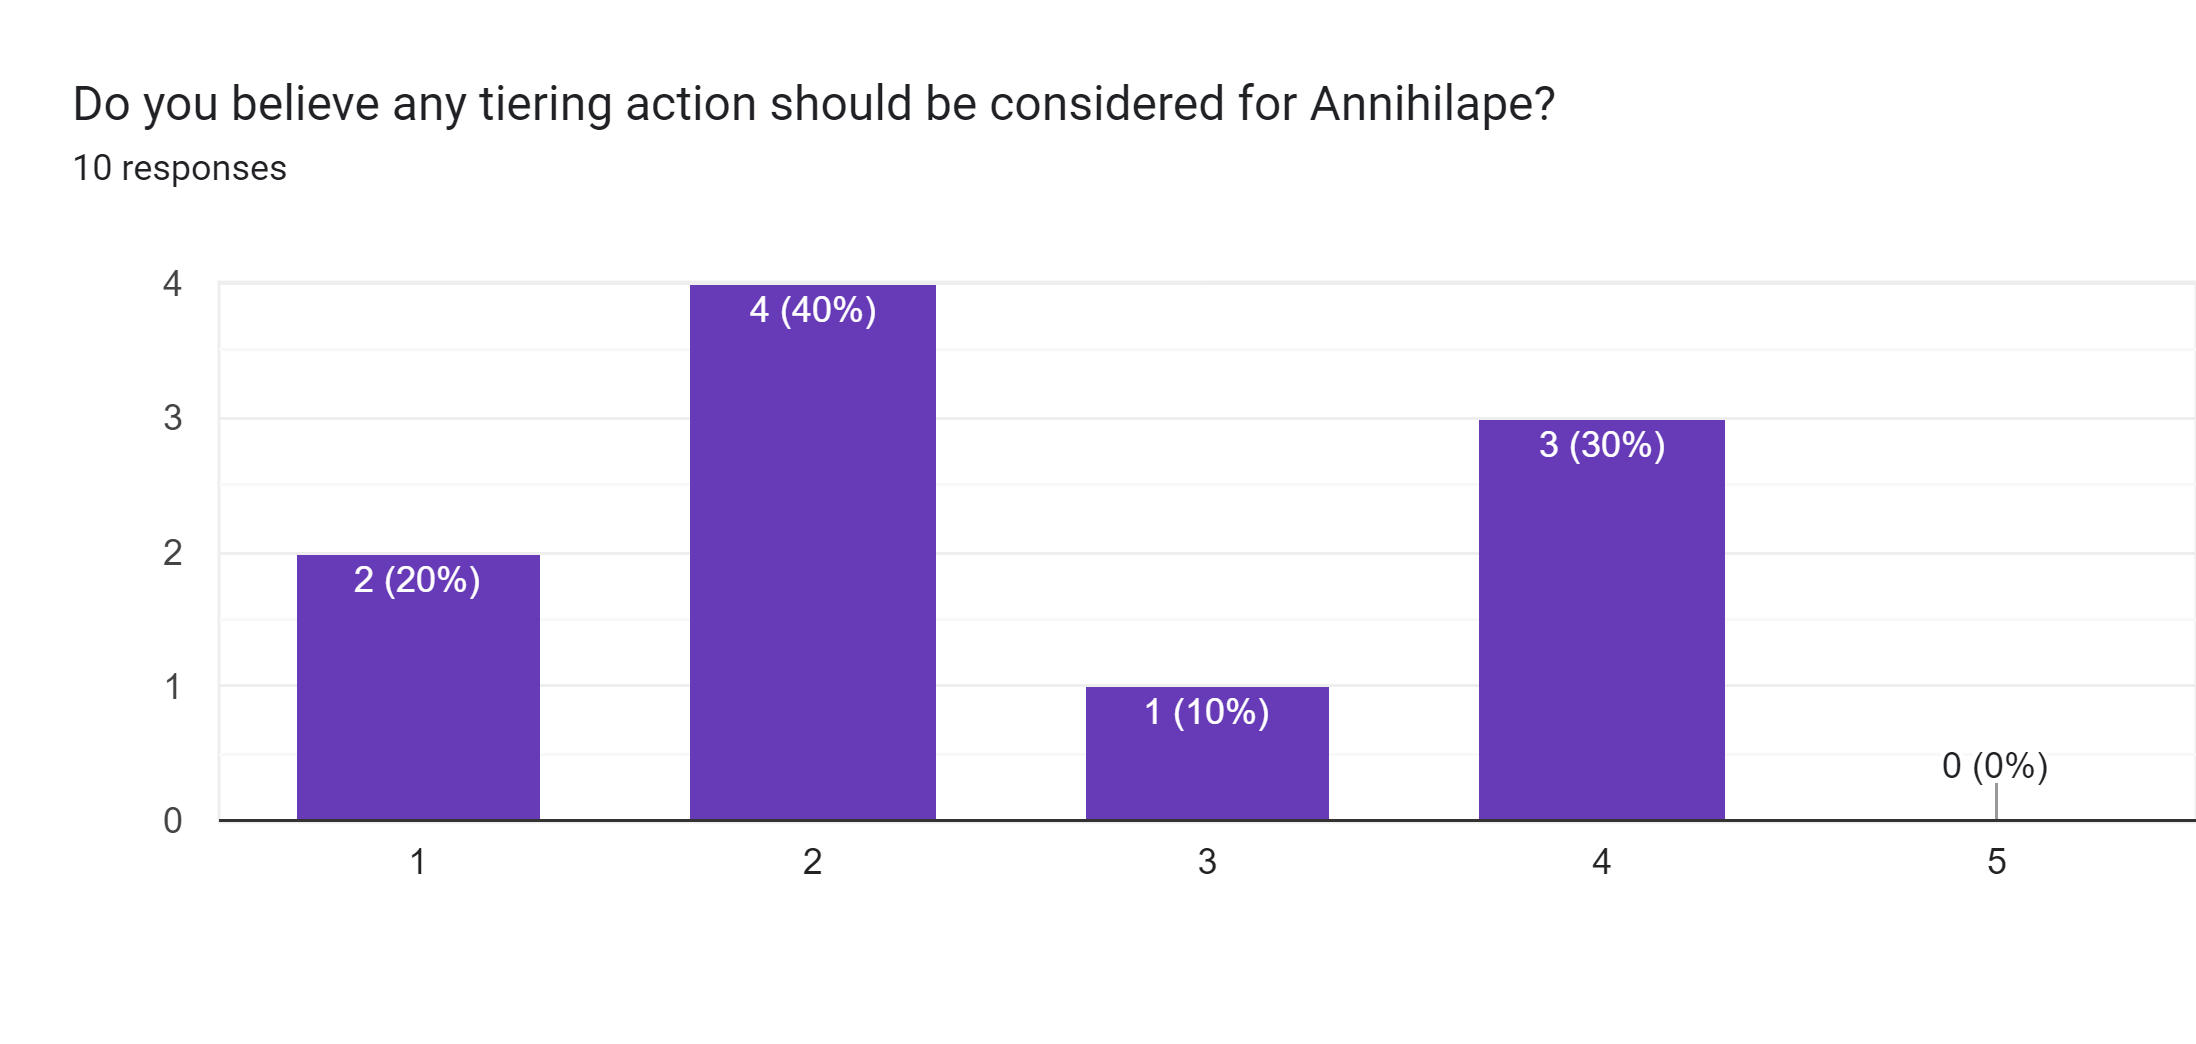 Forms response chart. Question title: Do you believe any tiering action should be considered for Annihilape?. Number of responses: 10 responses.